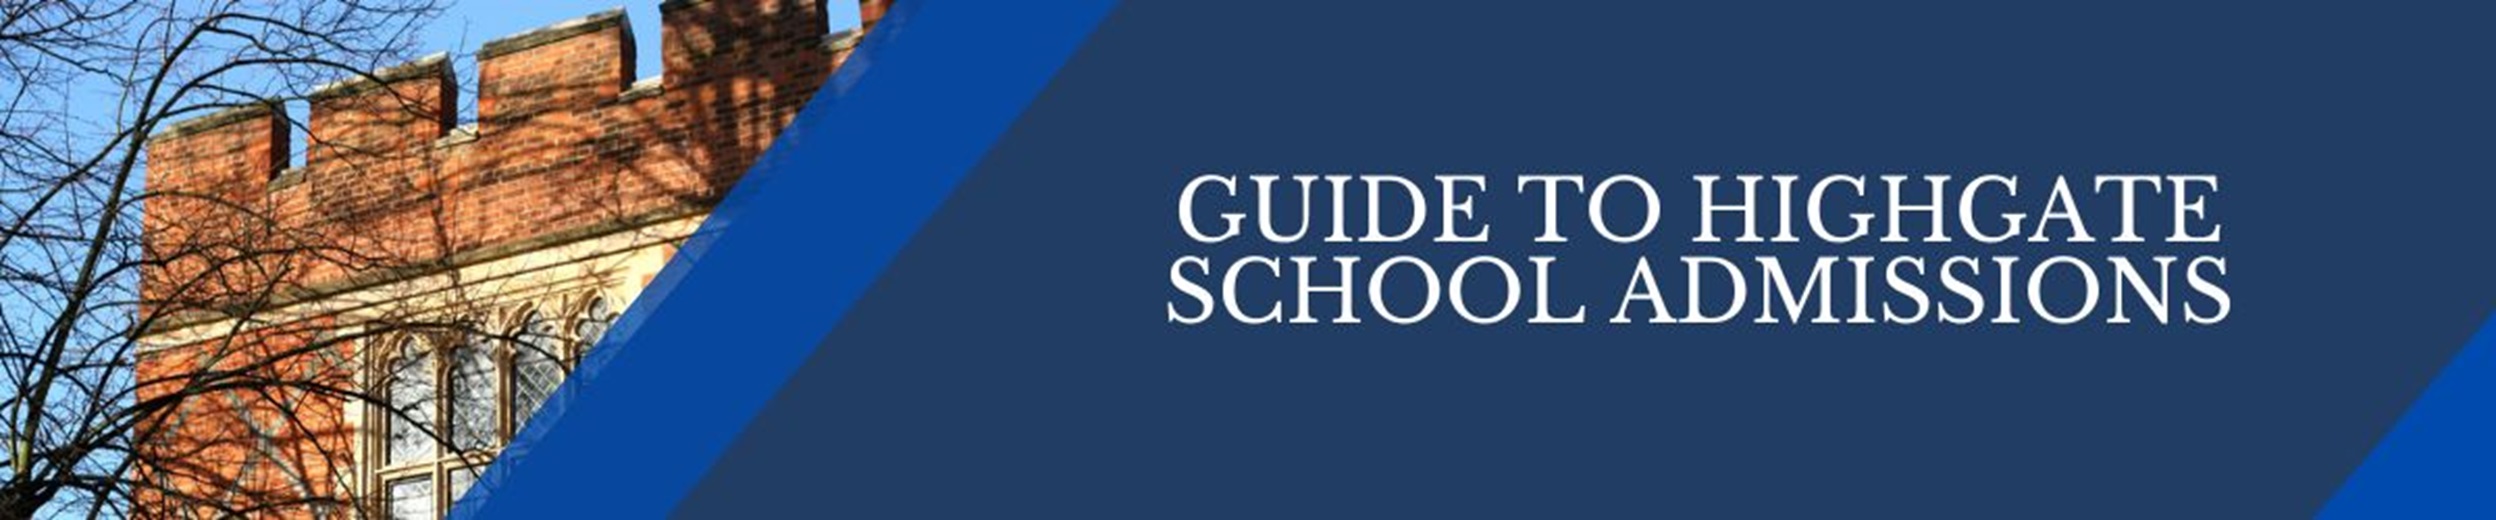 A Guide to Highgate School Admissions